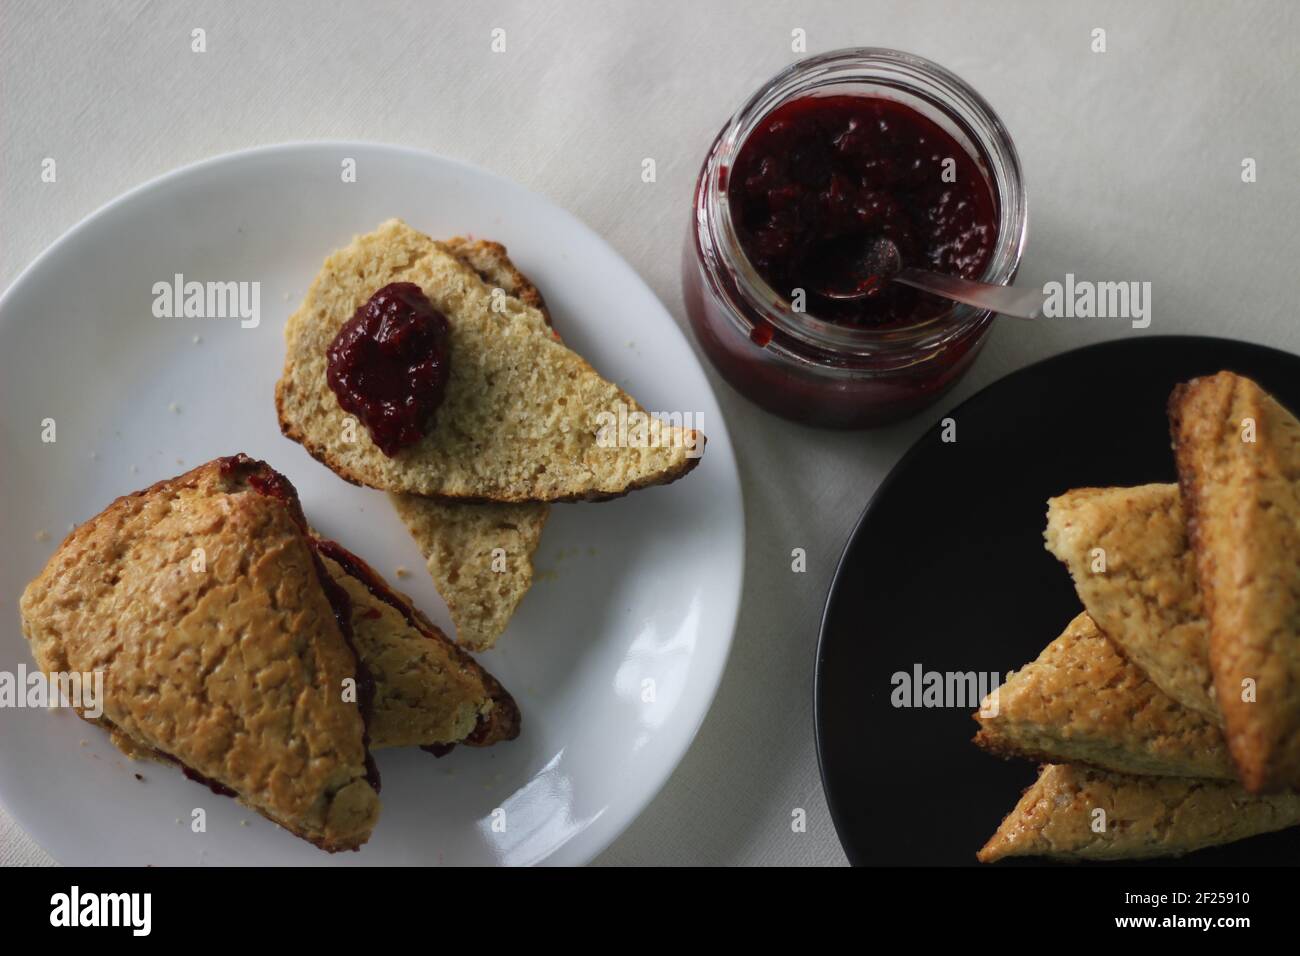 Home-baked plain mildly sweet buttermilk scones served along with homemade strawberry jam. Shot on white background Stock Photo